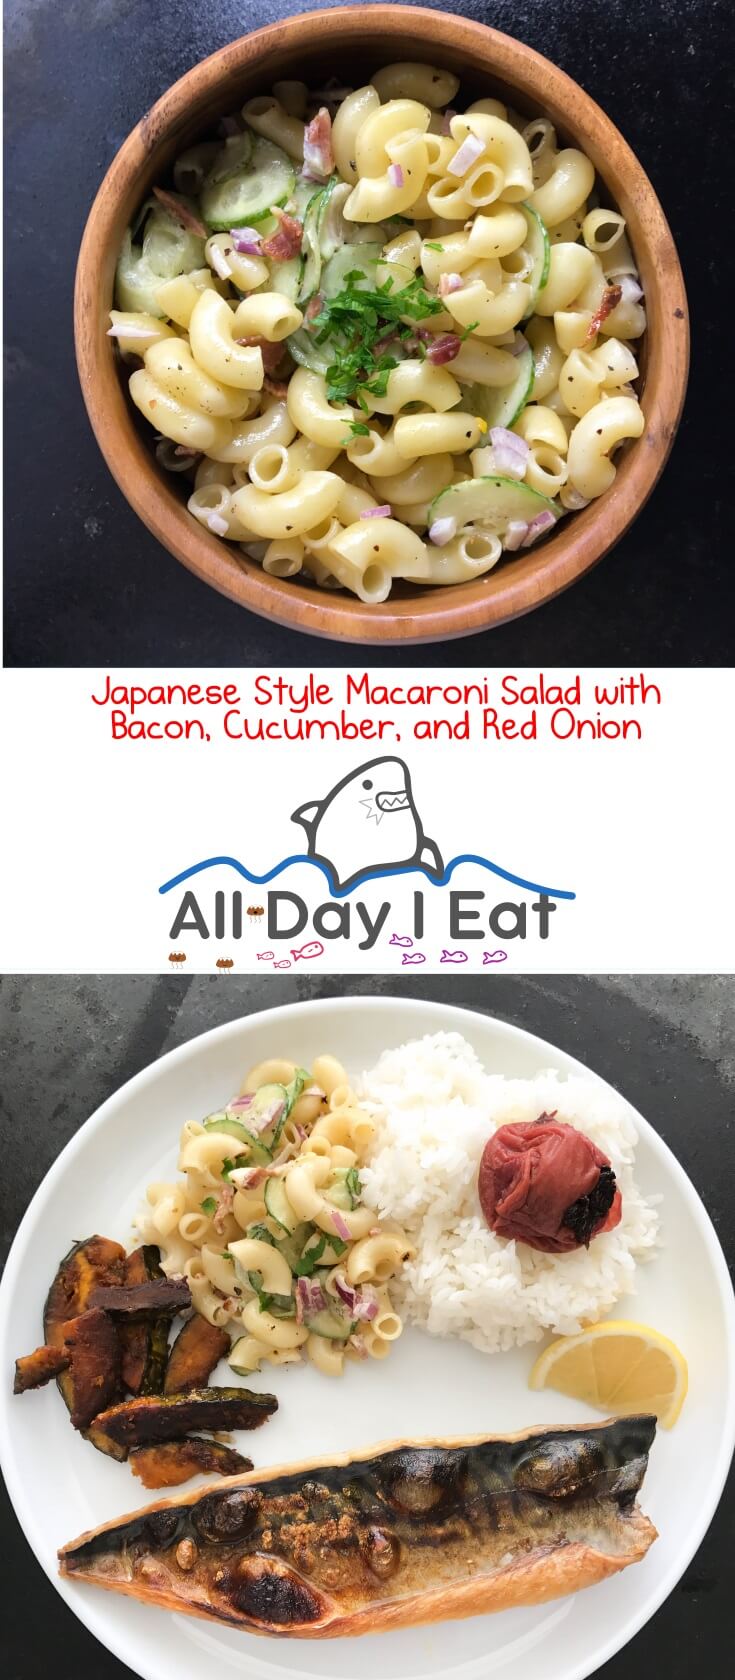 Japanese Style Macaroni Salad with Bacon, Cucumber, and Red Onion. A light tasting side that can accompany almost any entree! | www.alldayieat.com